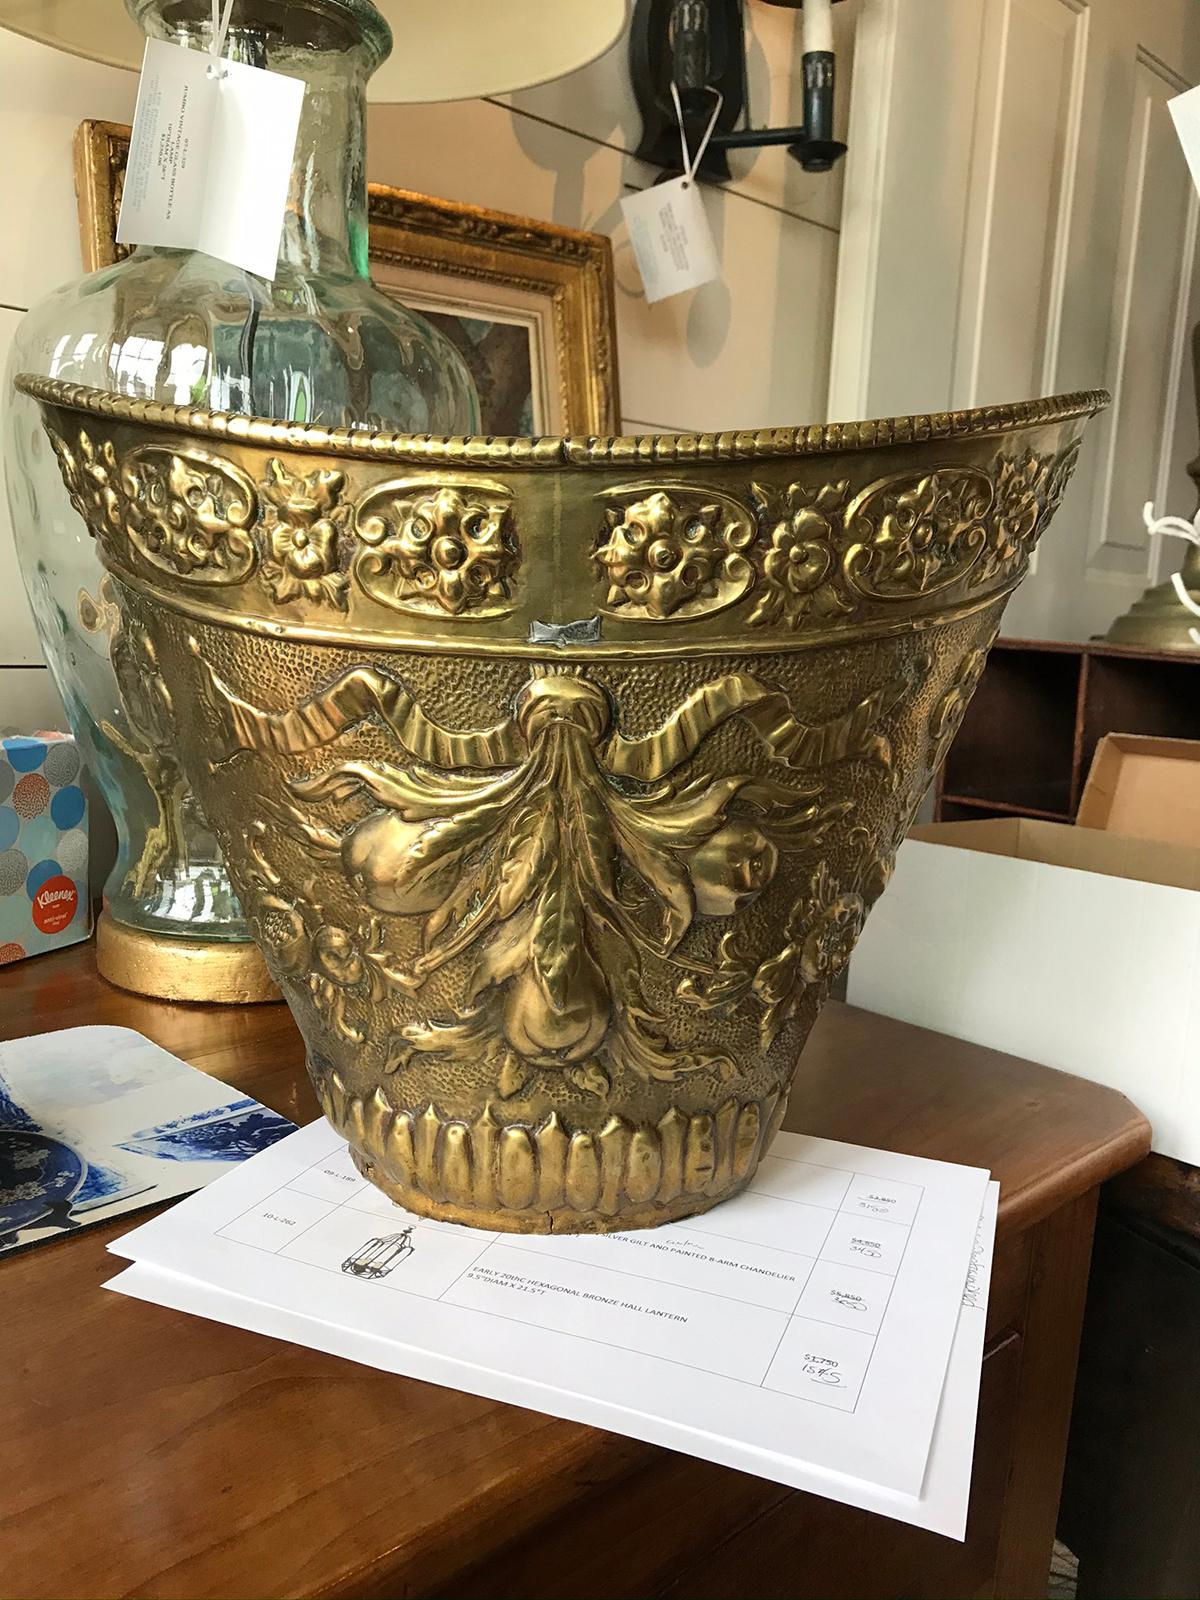 19th century brass kindling bucket
could be used as a waste basket / trash can.